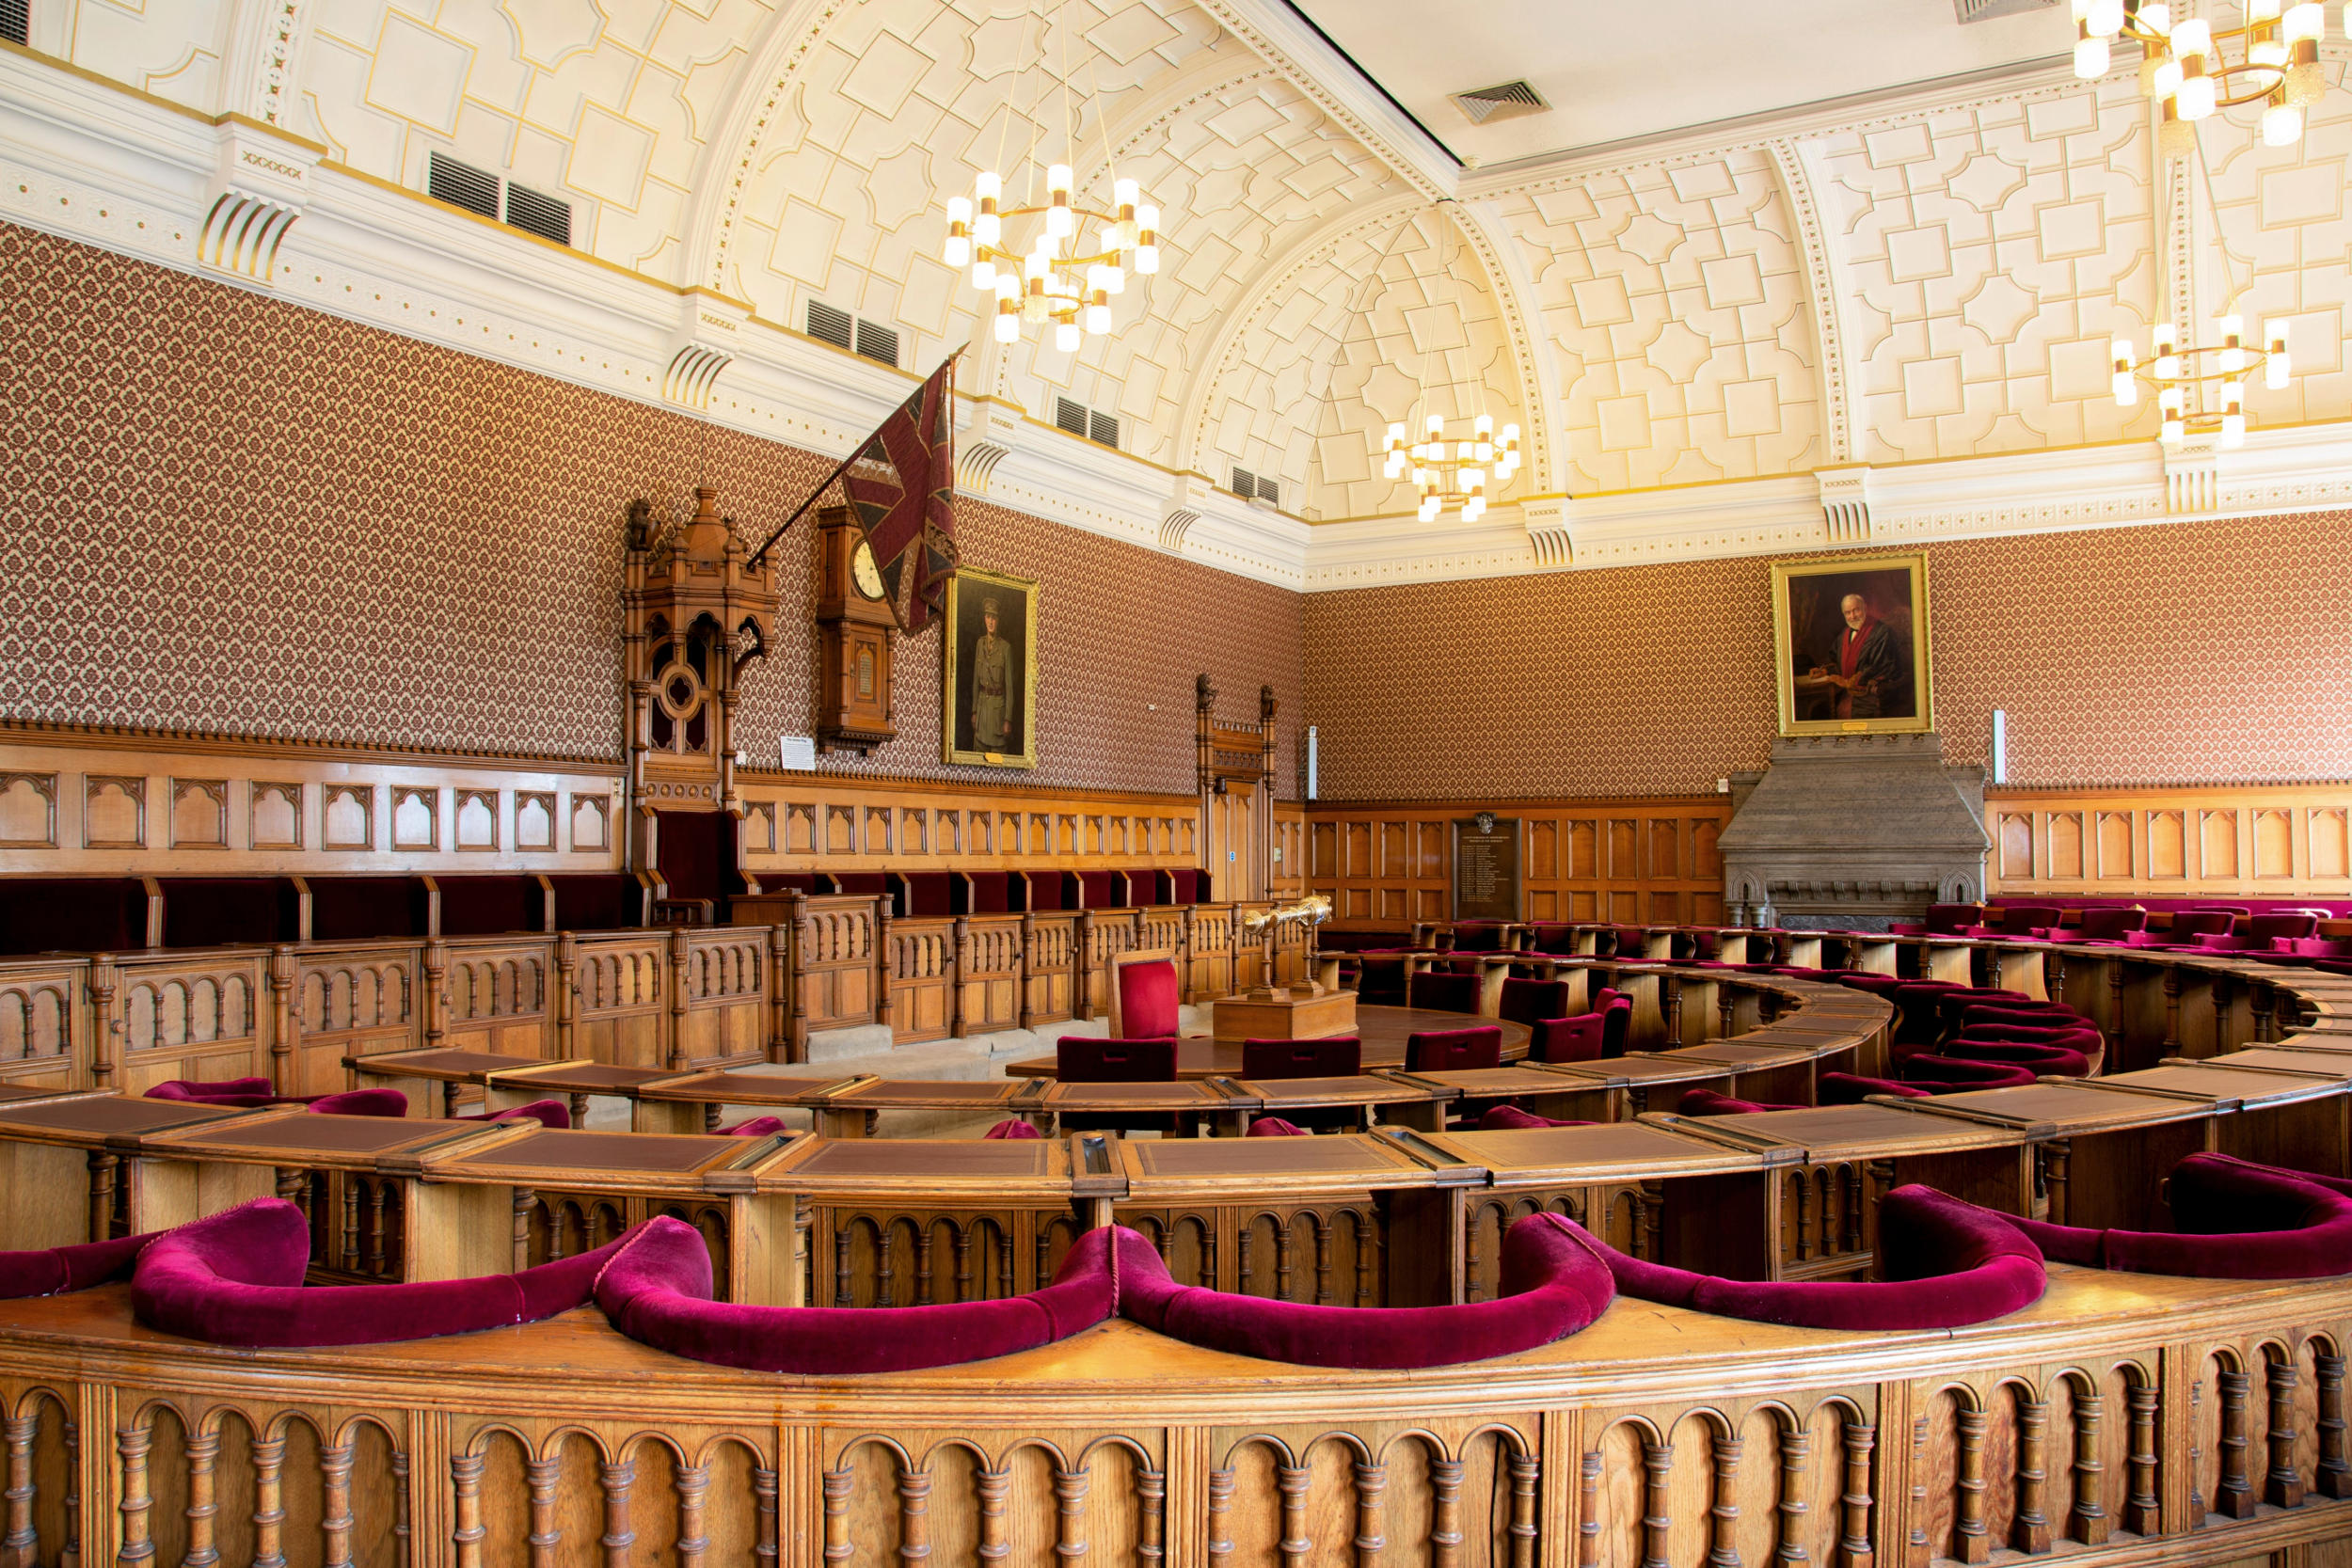 Middlesbrough's historic wood-panelled council chamber